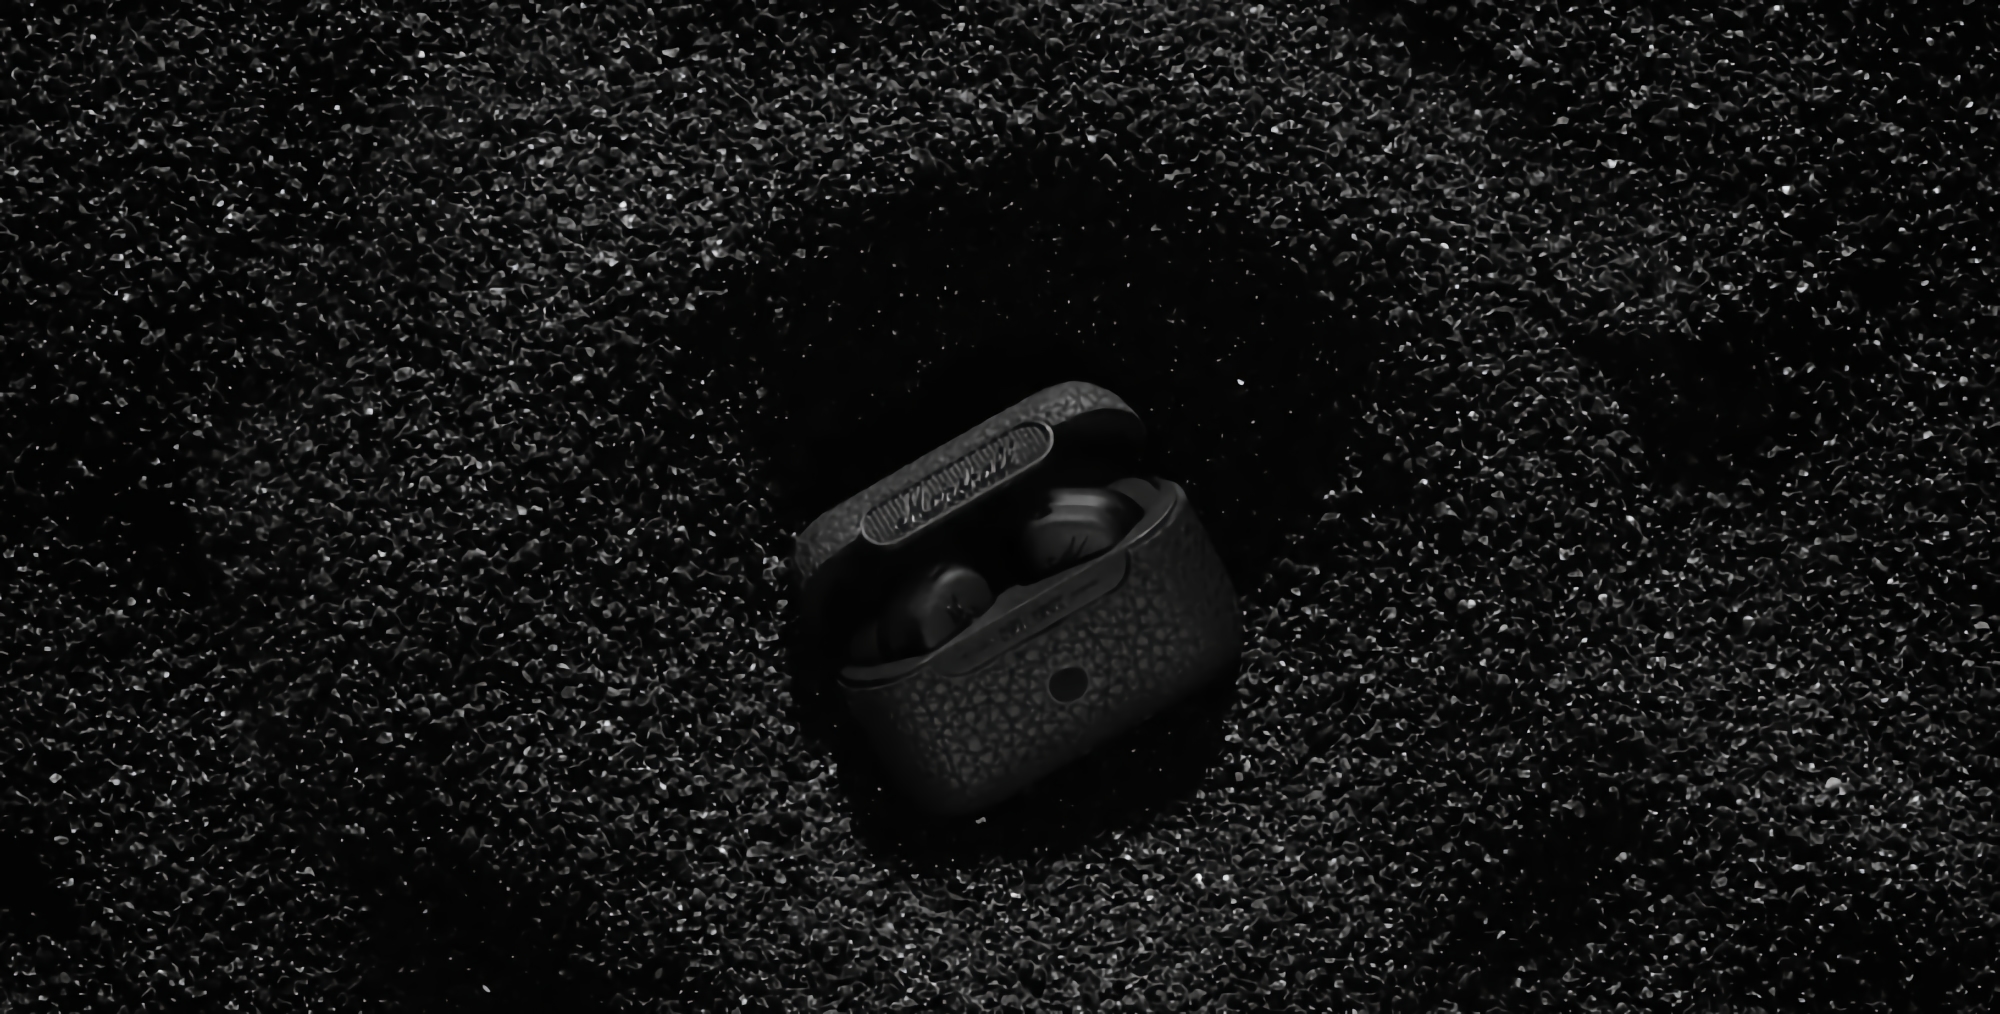 In honor of the 60th anniversary of the company: Marshall introduced a special version of TWS-earphones Motif ANC in the color of Diamond Black